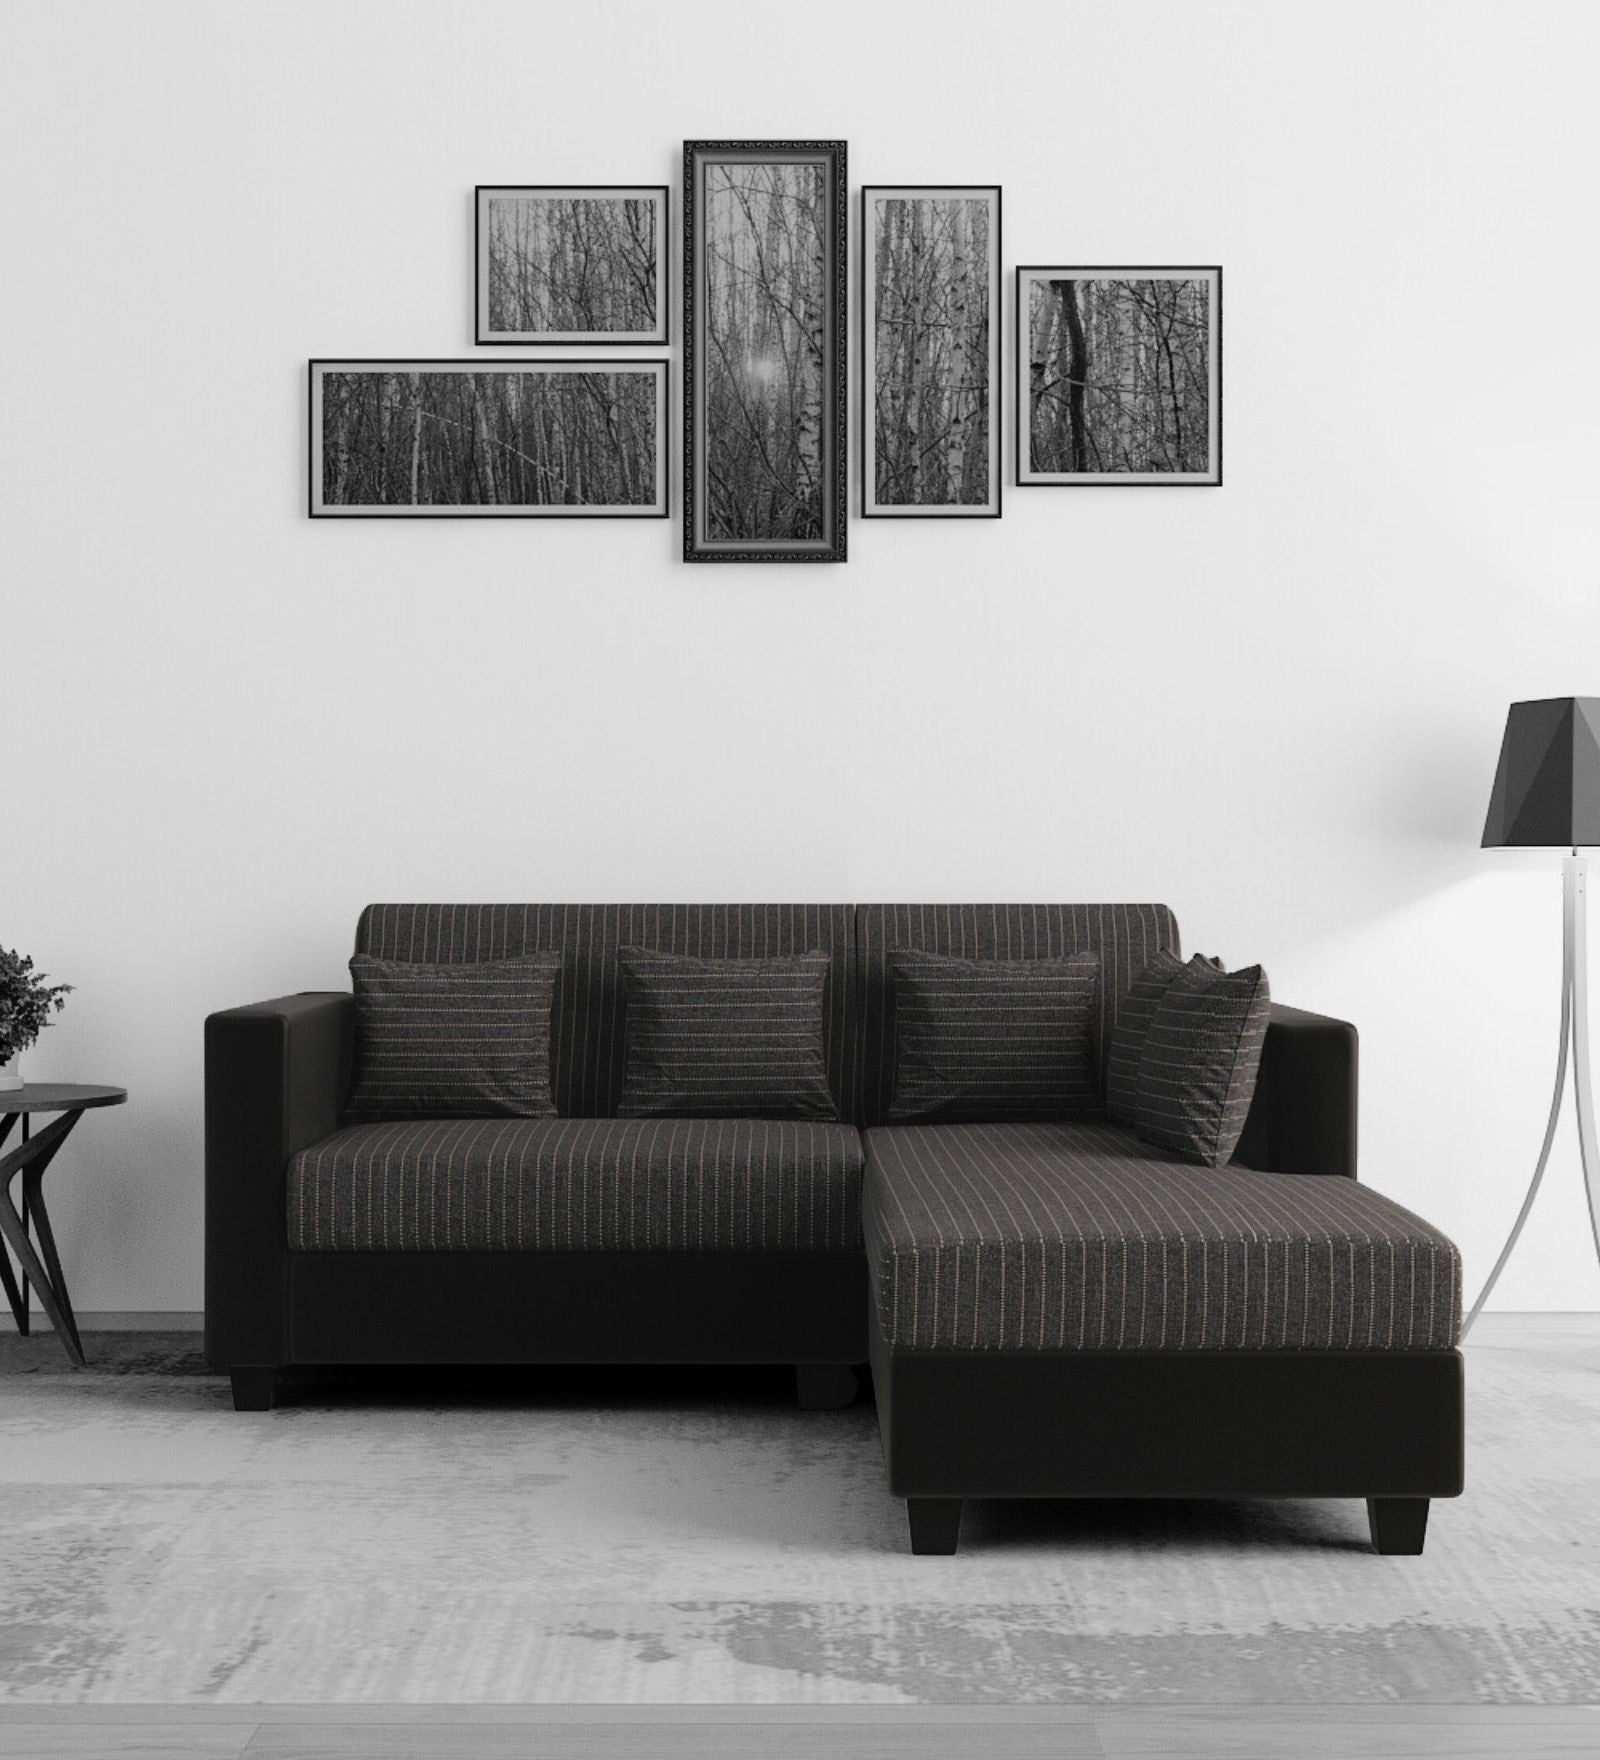 Baley Fabric LHS Sectional Sofa (2 + Lounger) In Lama Black Colour